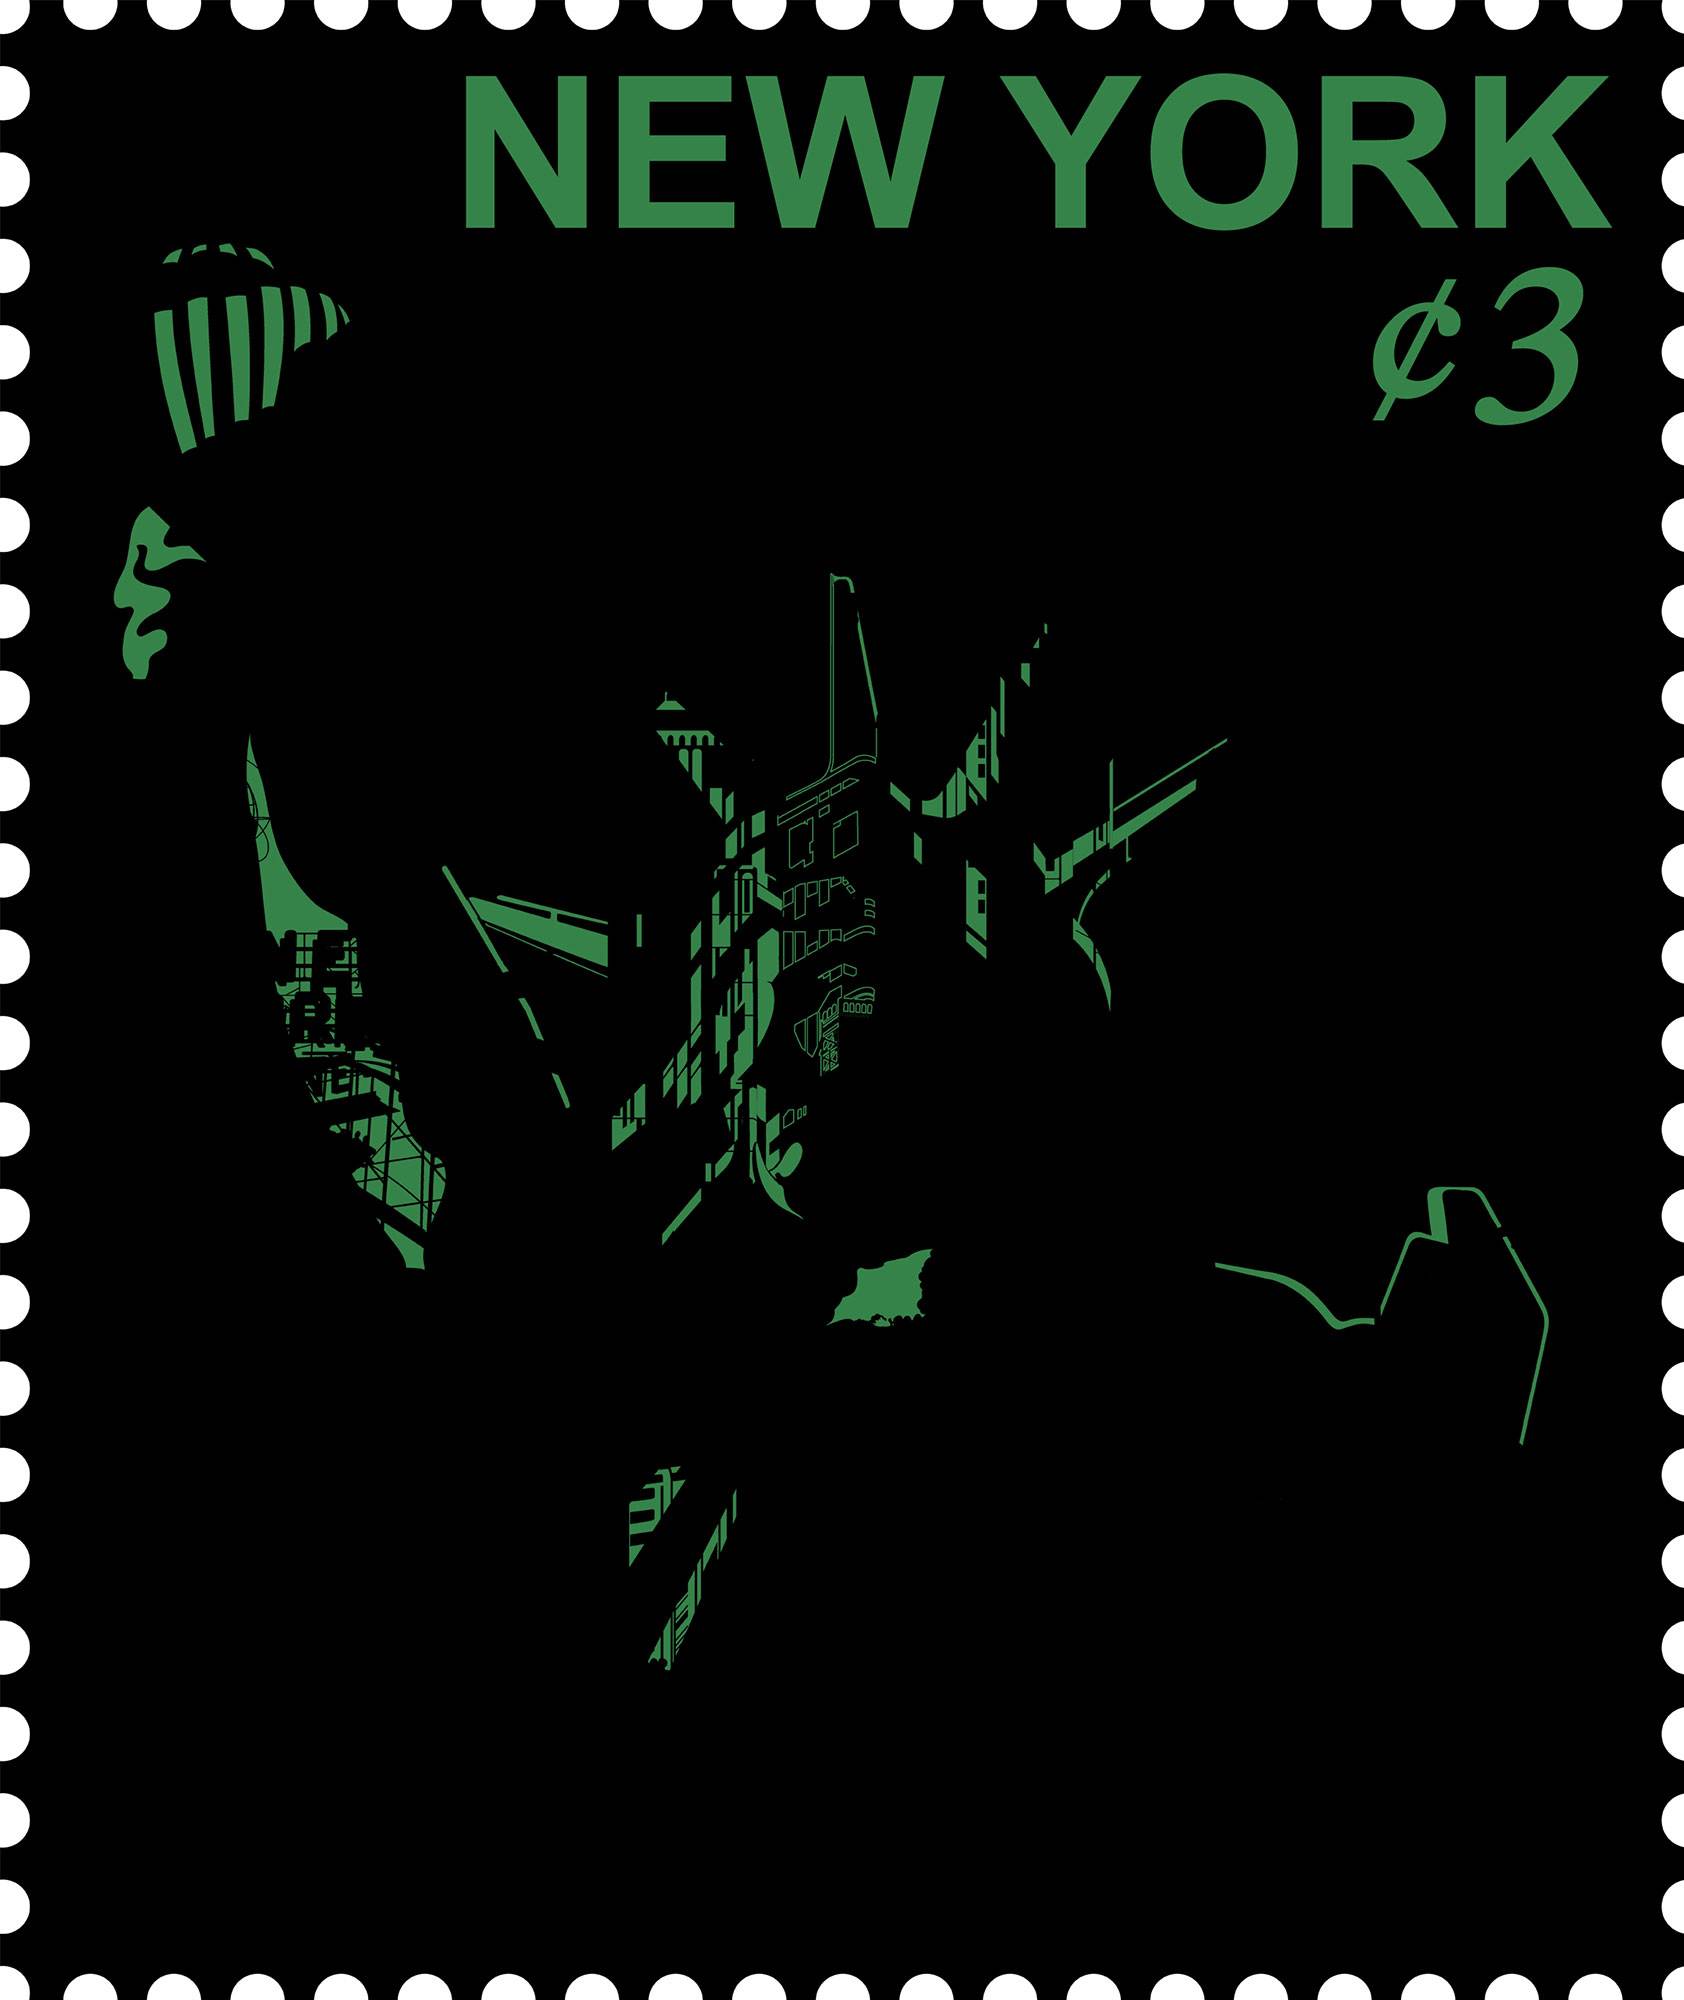 NYC Cityscape Stamp